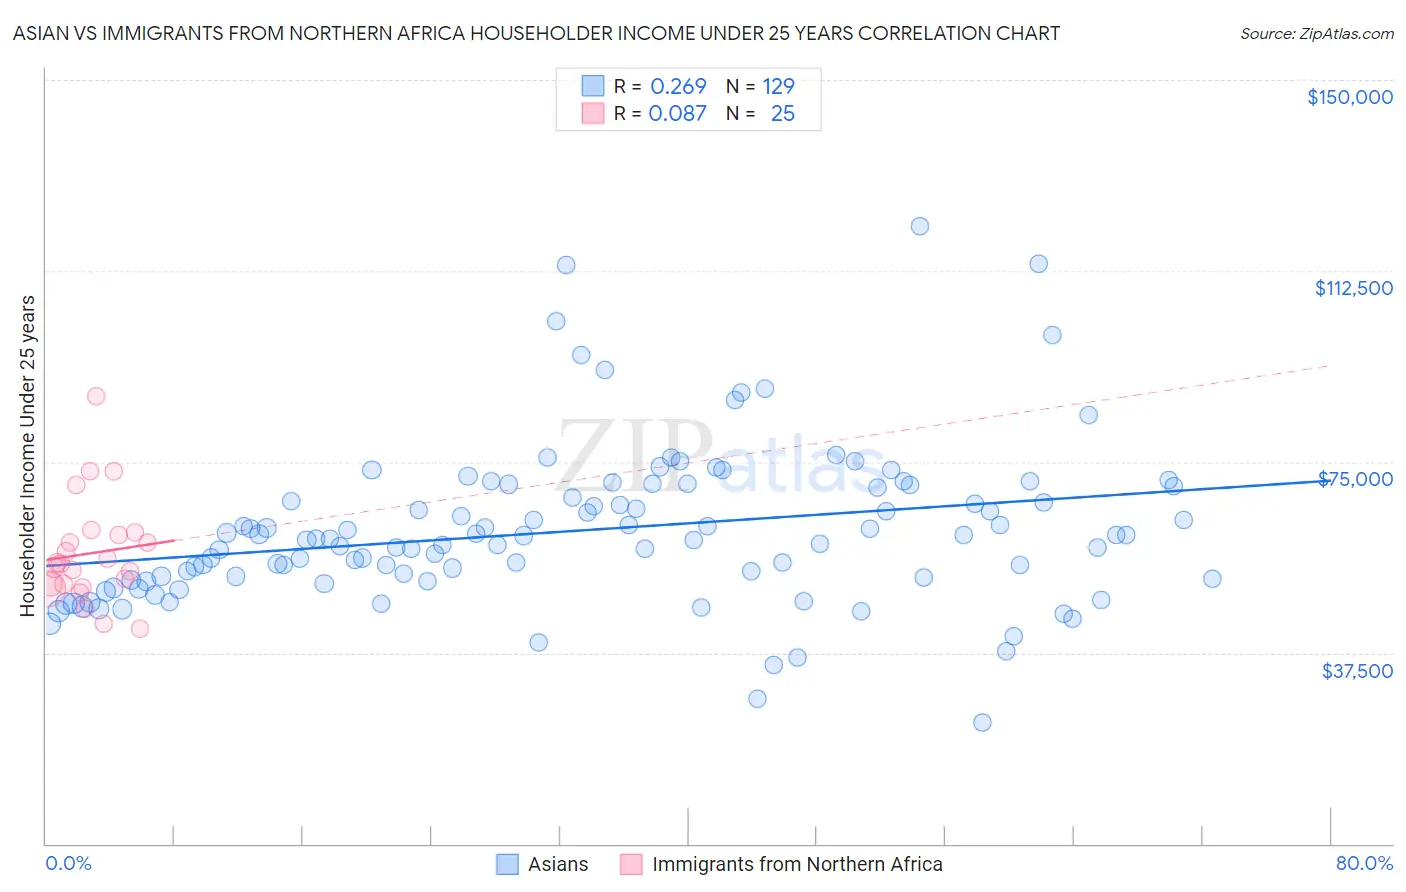 Asian vs Immigrants from Northern Africa Householder Income Under 25 years